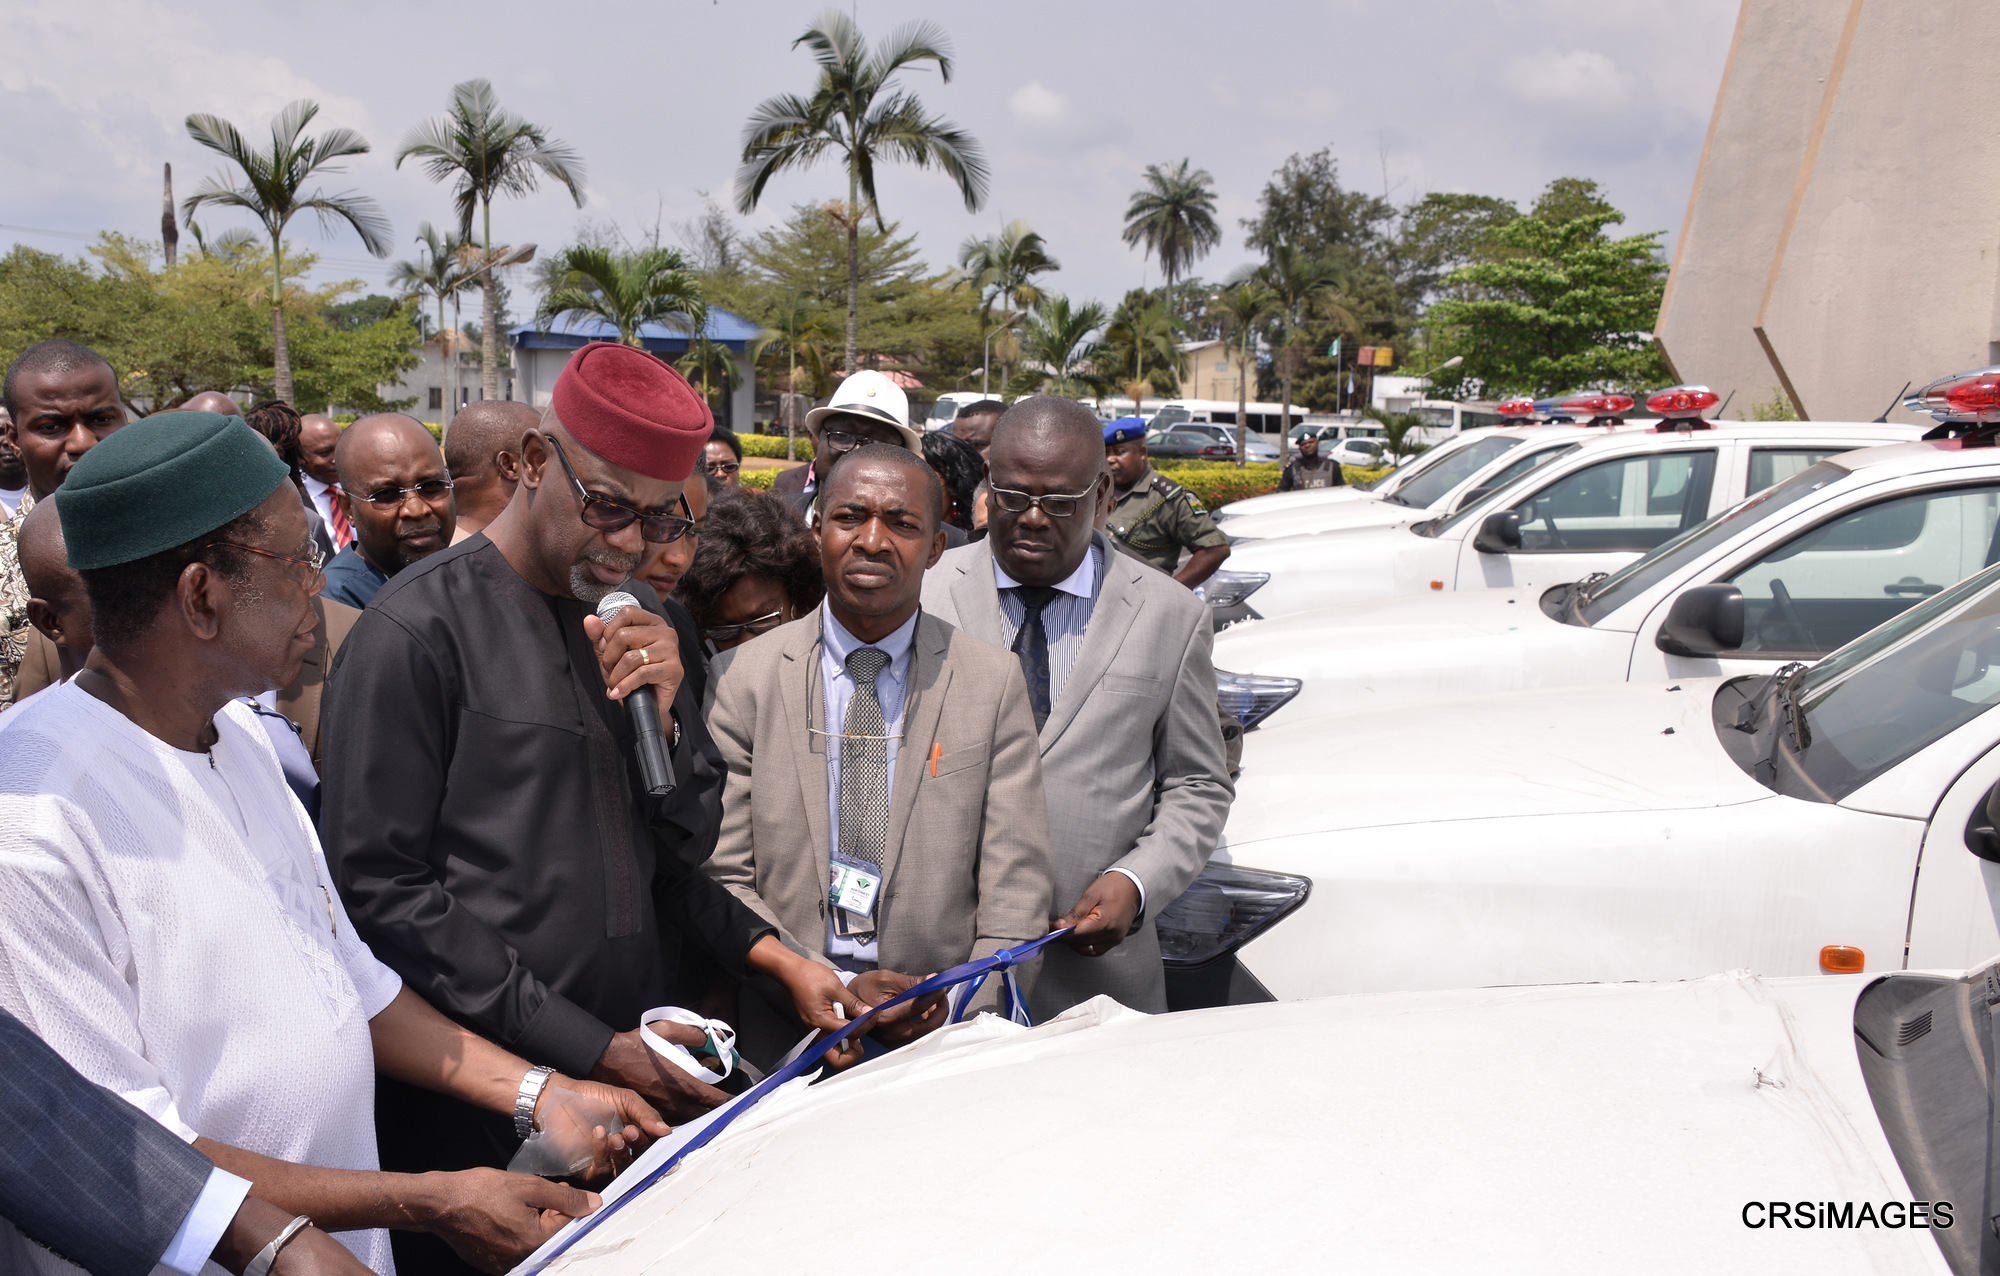 Calabar Free Trade Zone Oil And Gas Firms Donate Patrol Vehicles to Cross River Govt